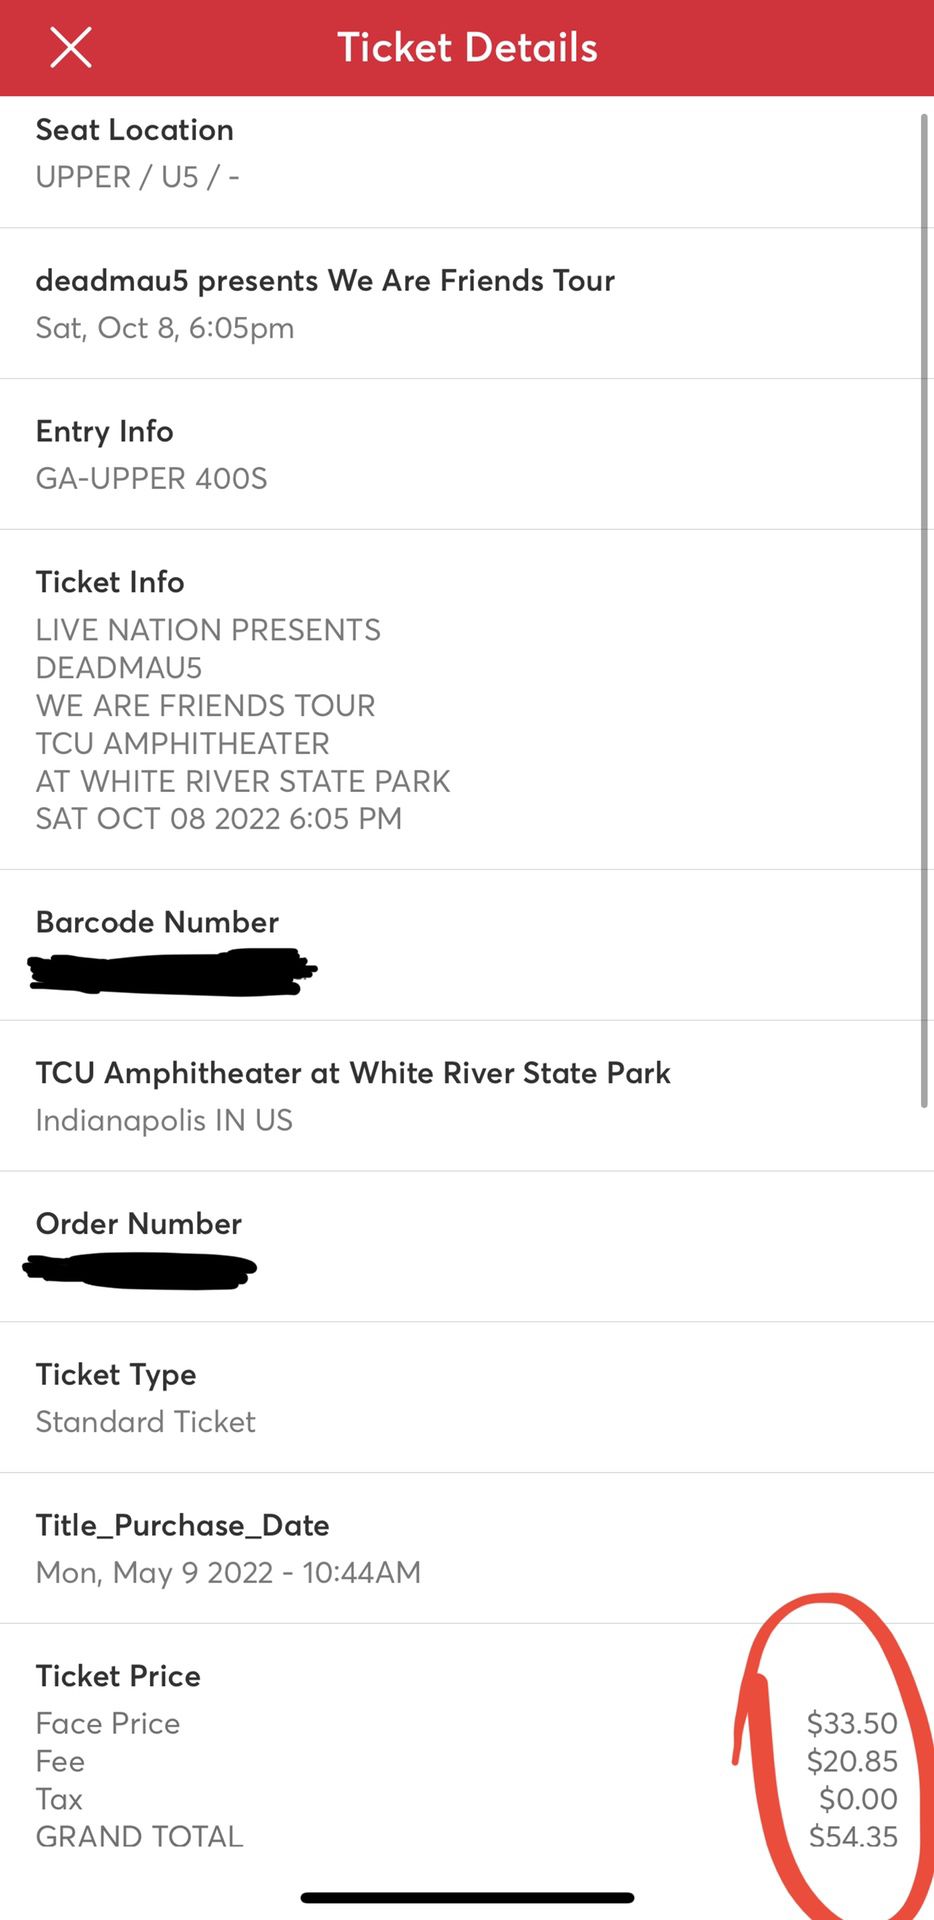 DISCOUNTED MAJORLY - 2 Tickets To Deadmau5 at White River